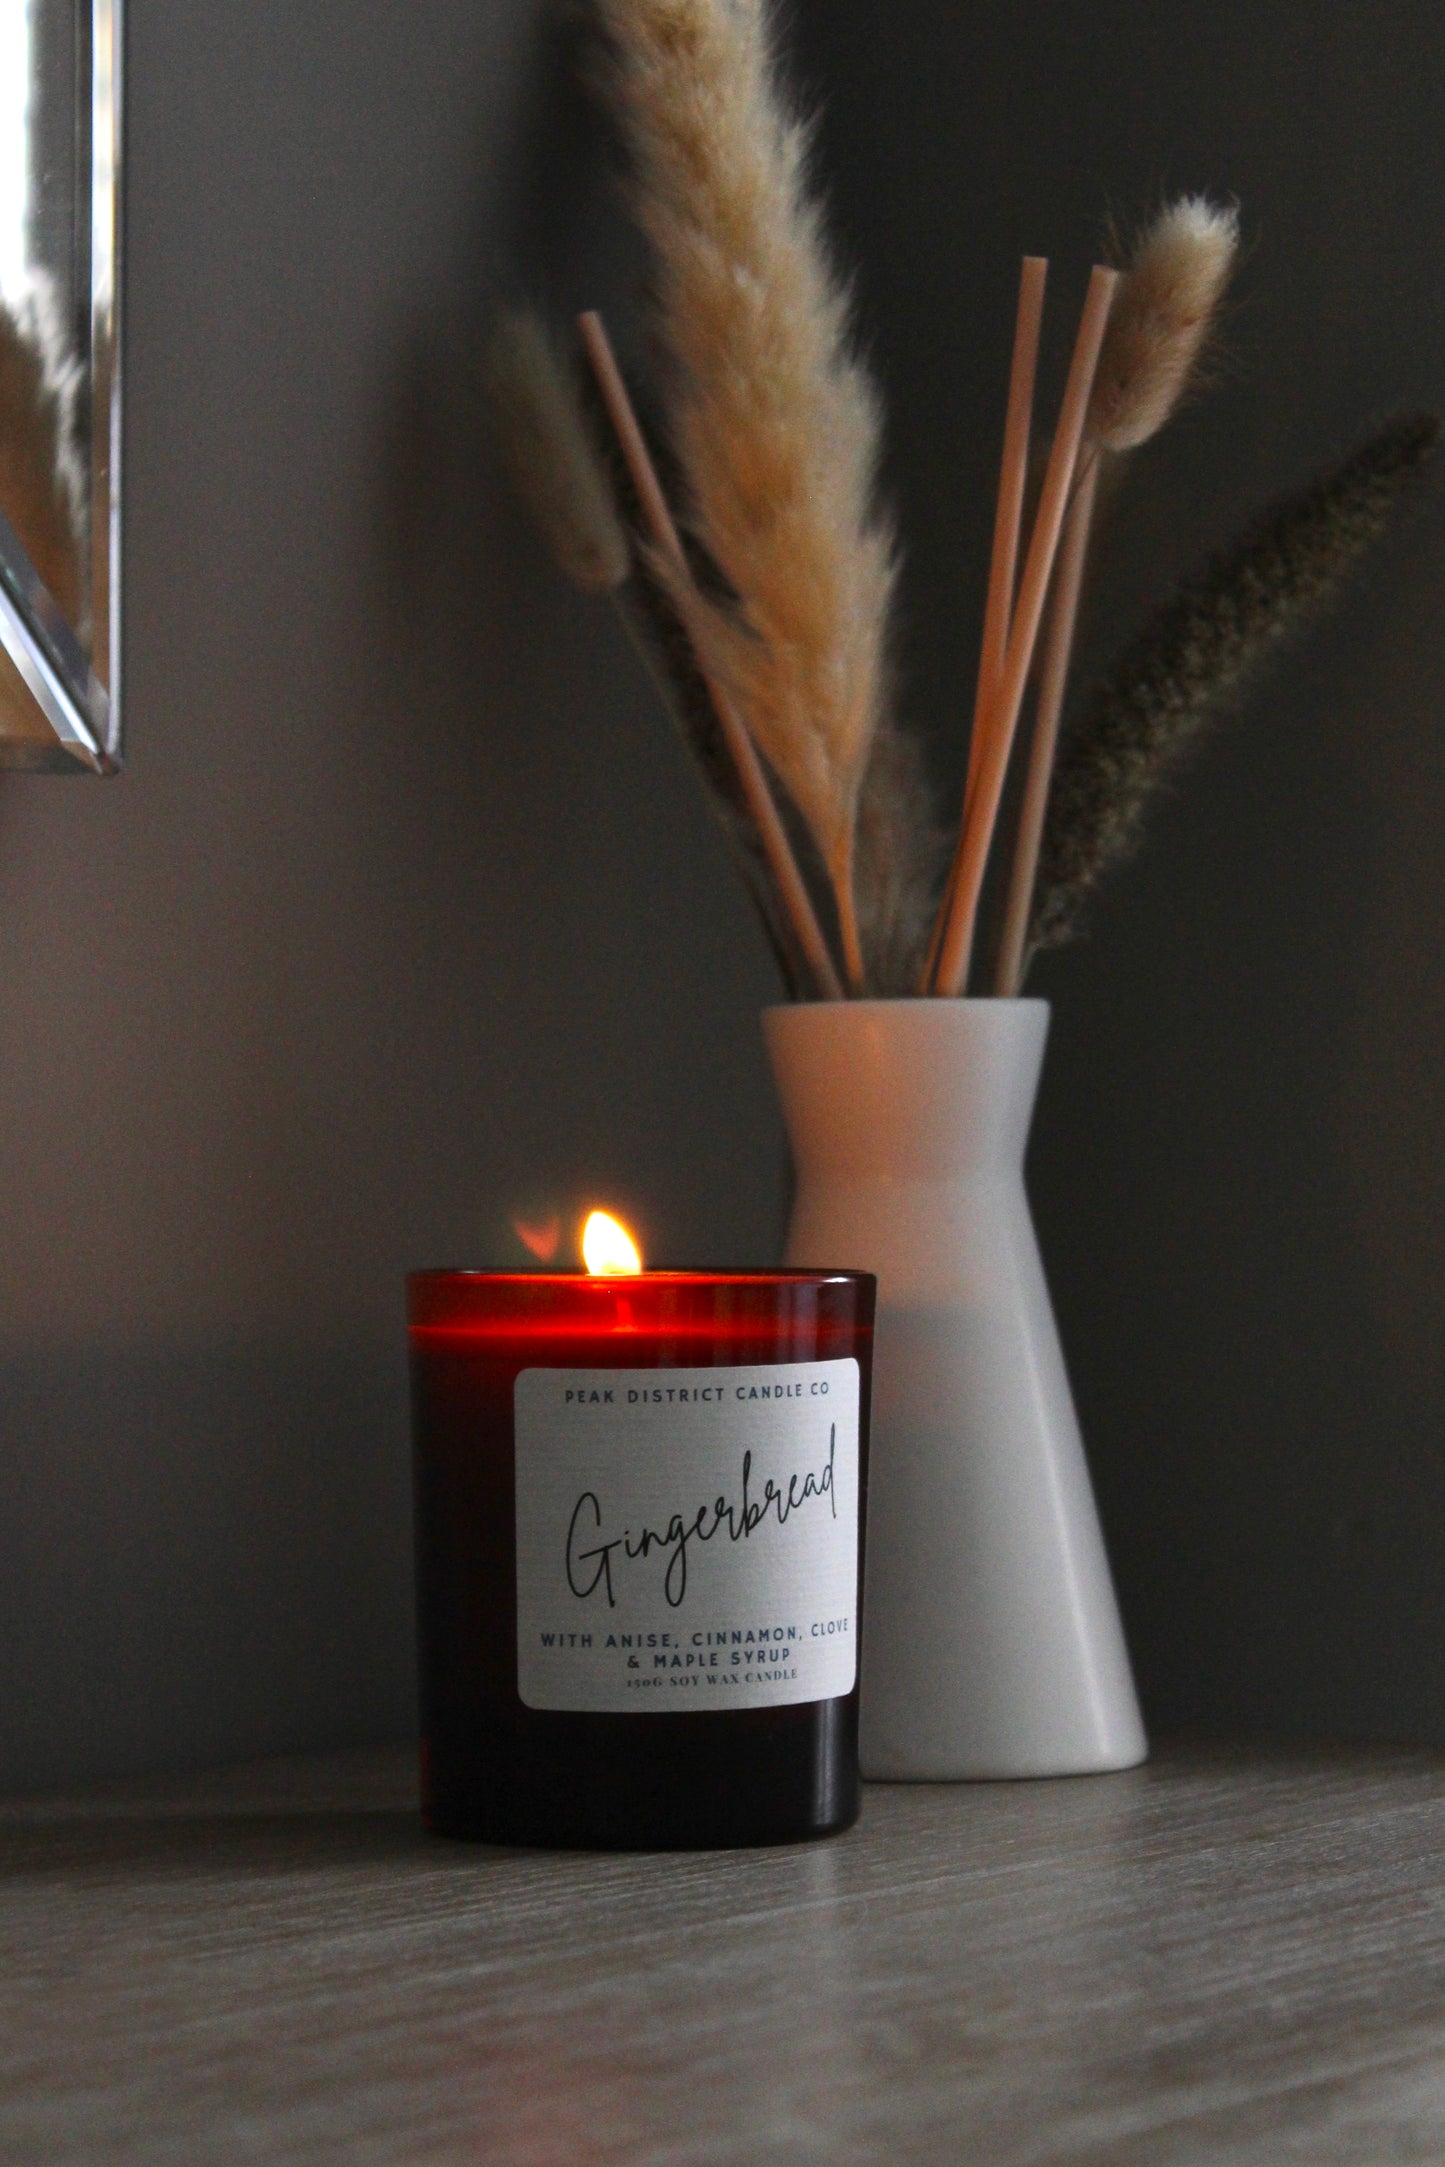 Gingerbread Soy Candle